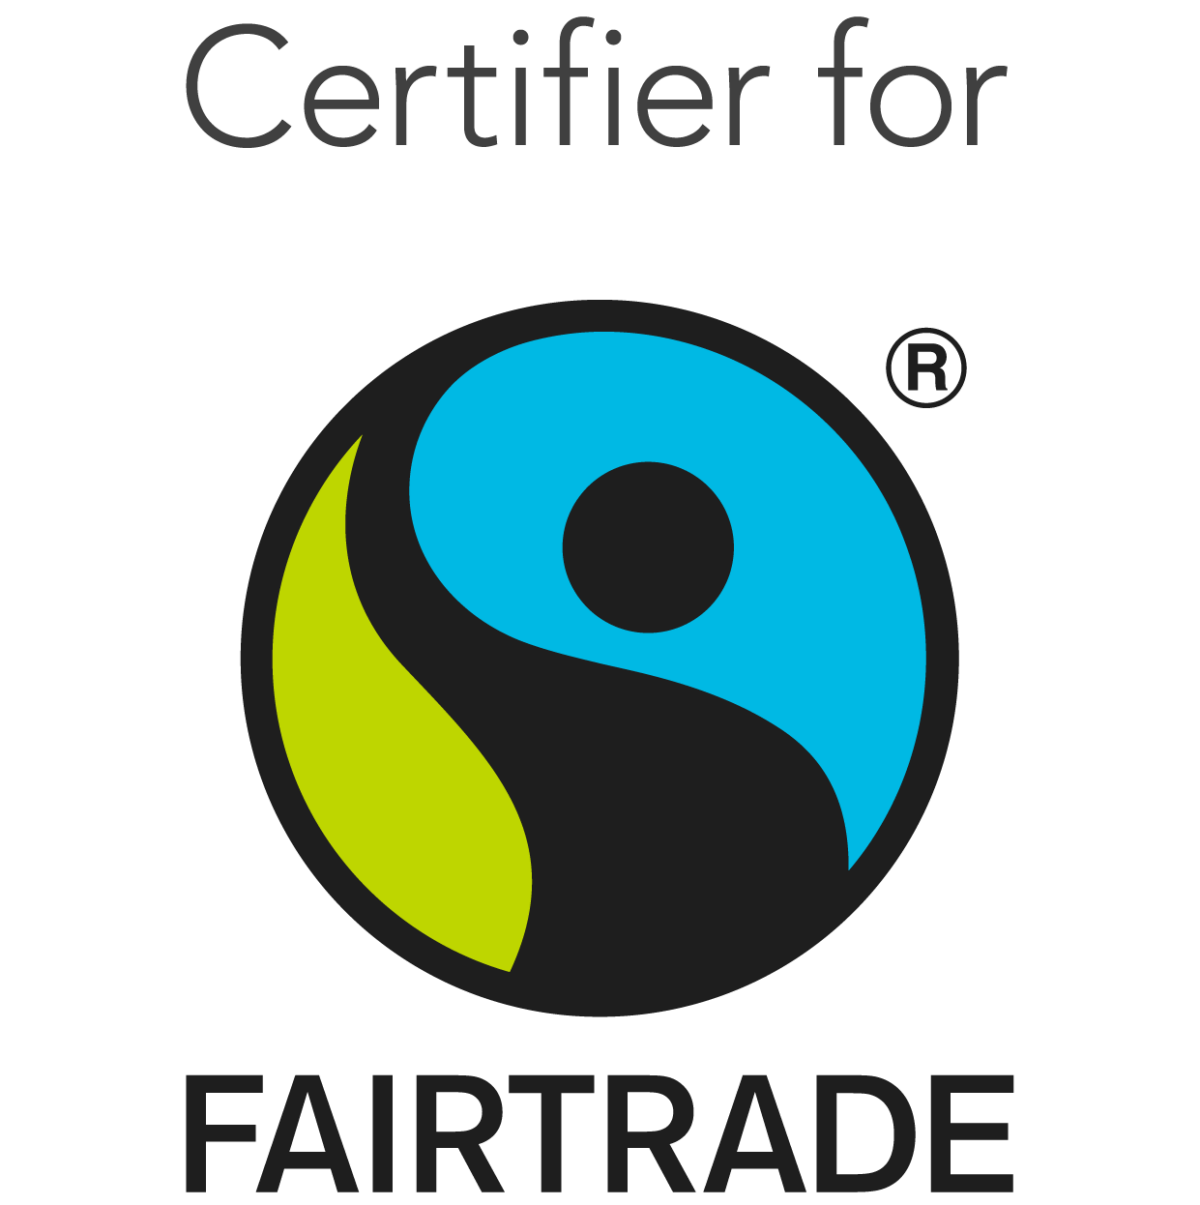 Does Fairtrade Really Work?